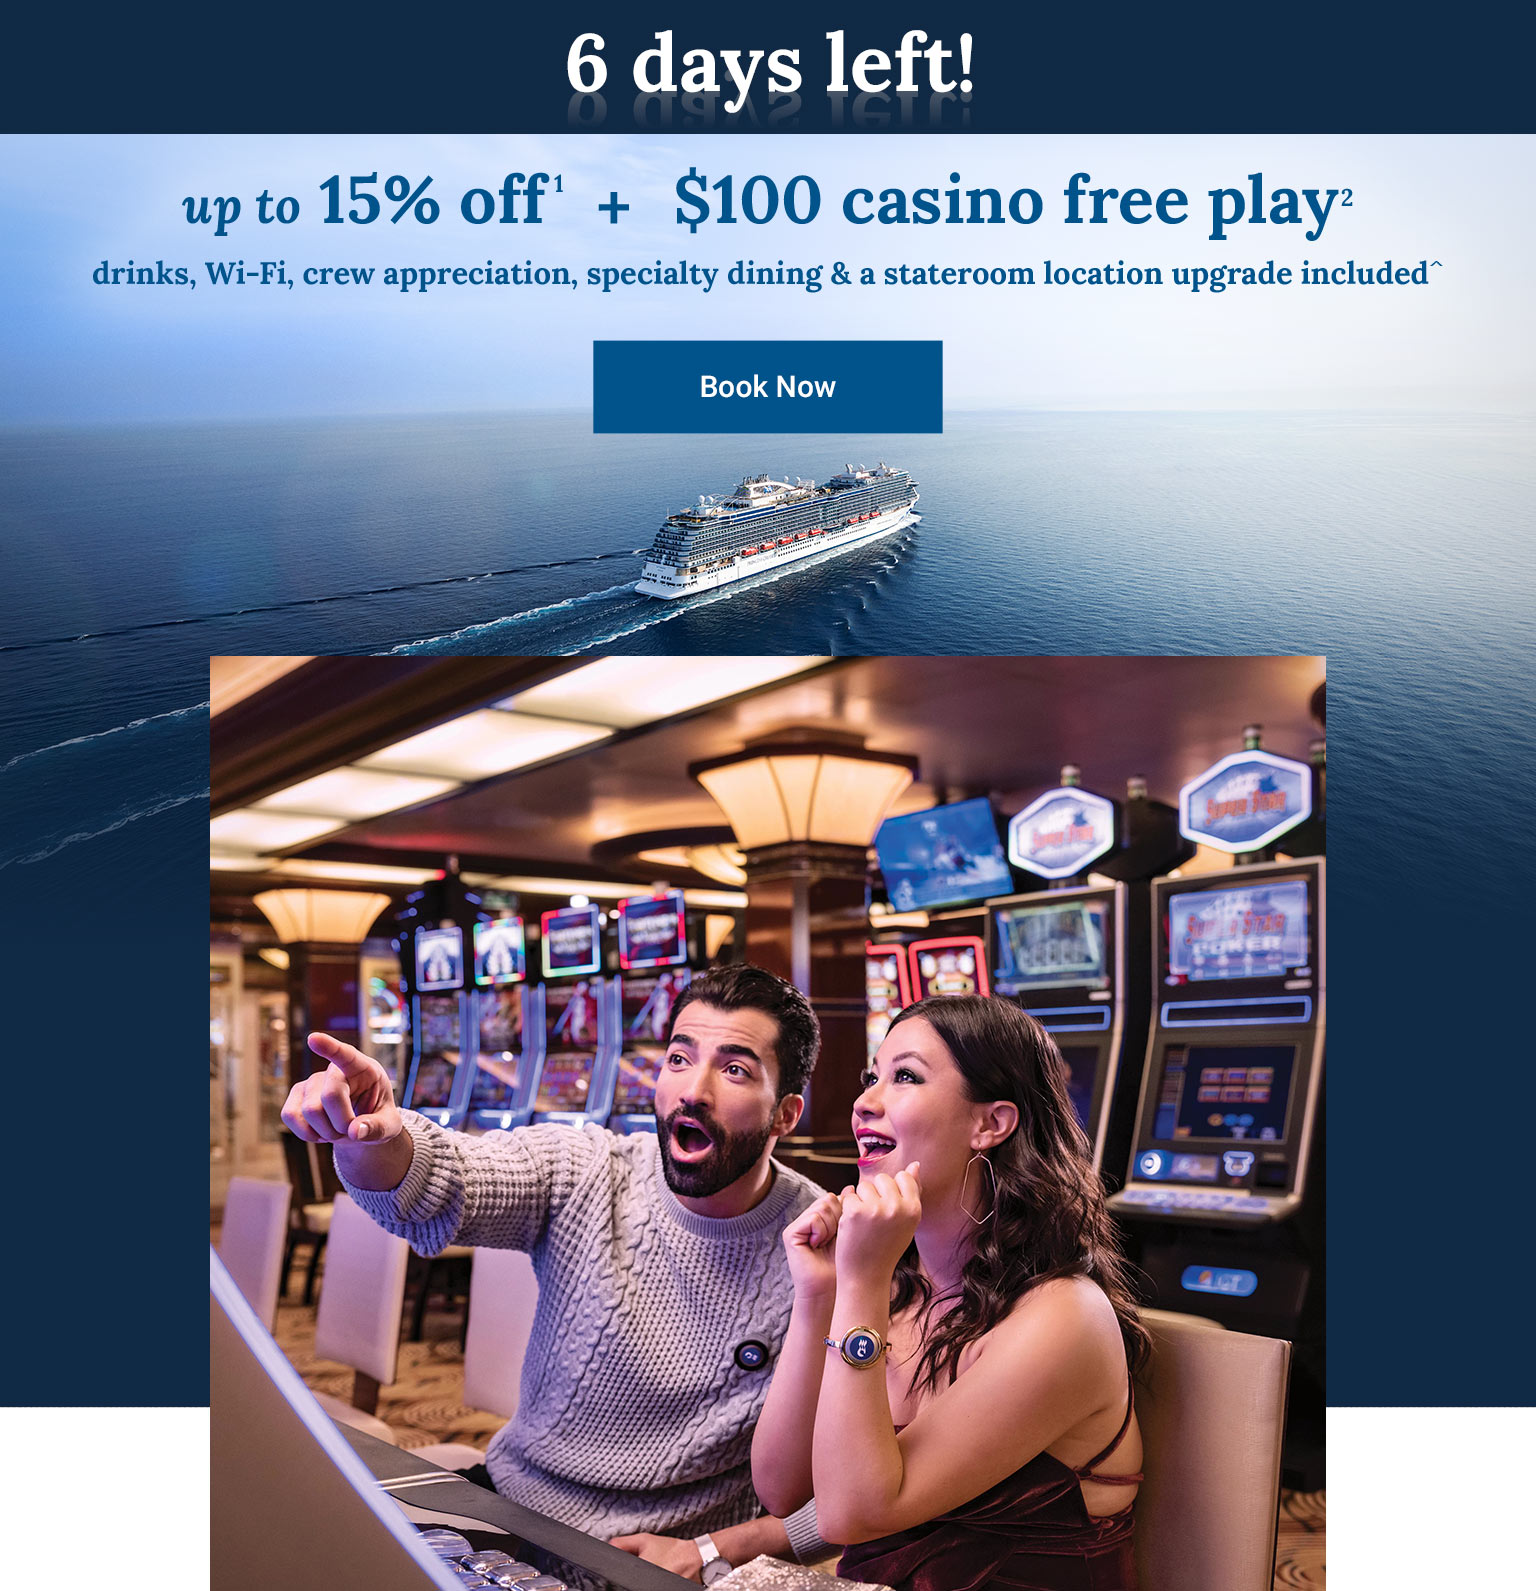 up to 15% off + $100 casino free play + drinks, Wi-Fi, crew appreciation, specialty dining and a stateroom location upgrade included. Click here to book.